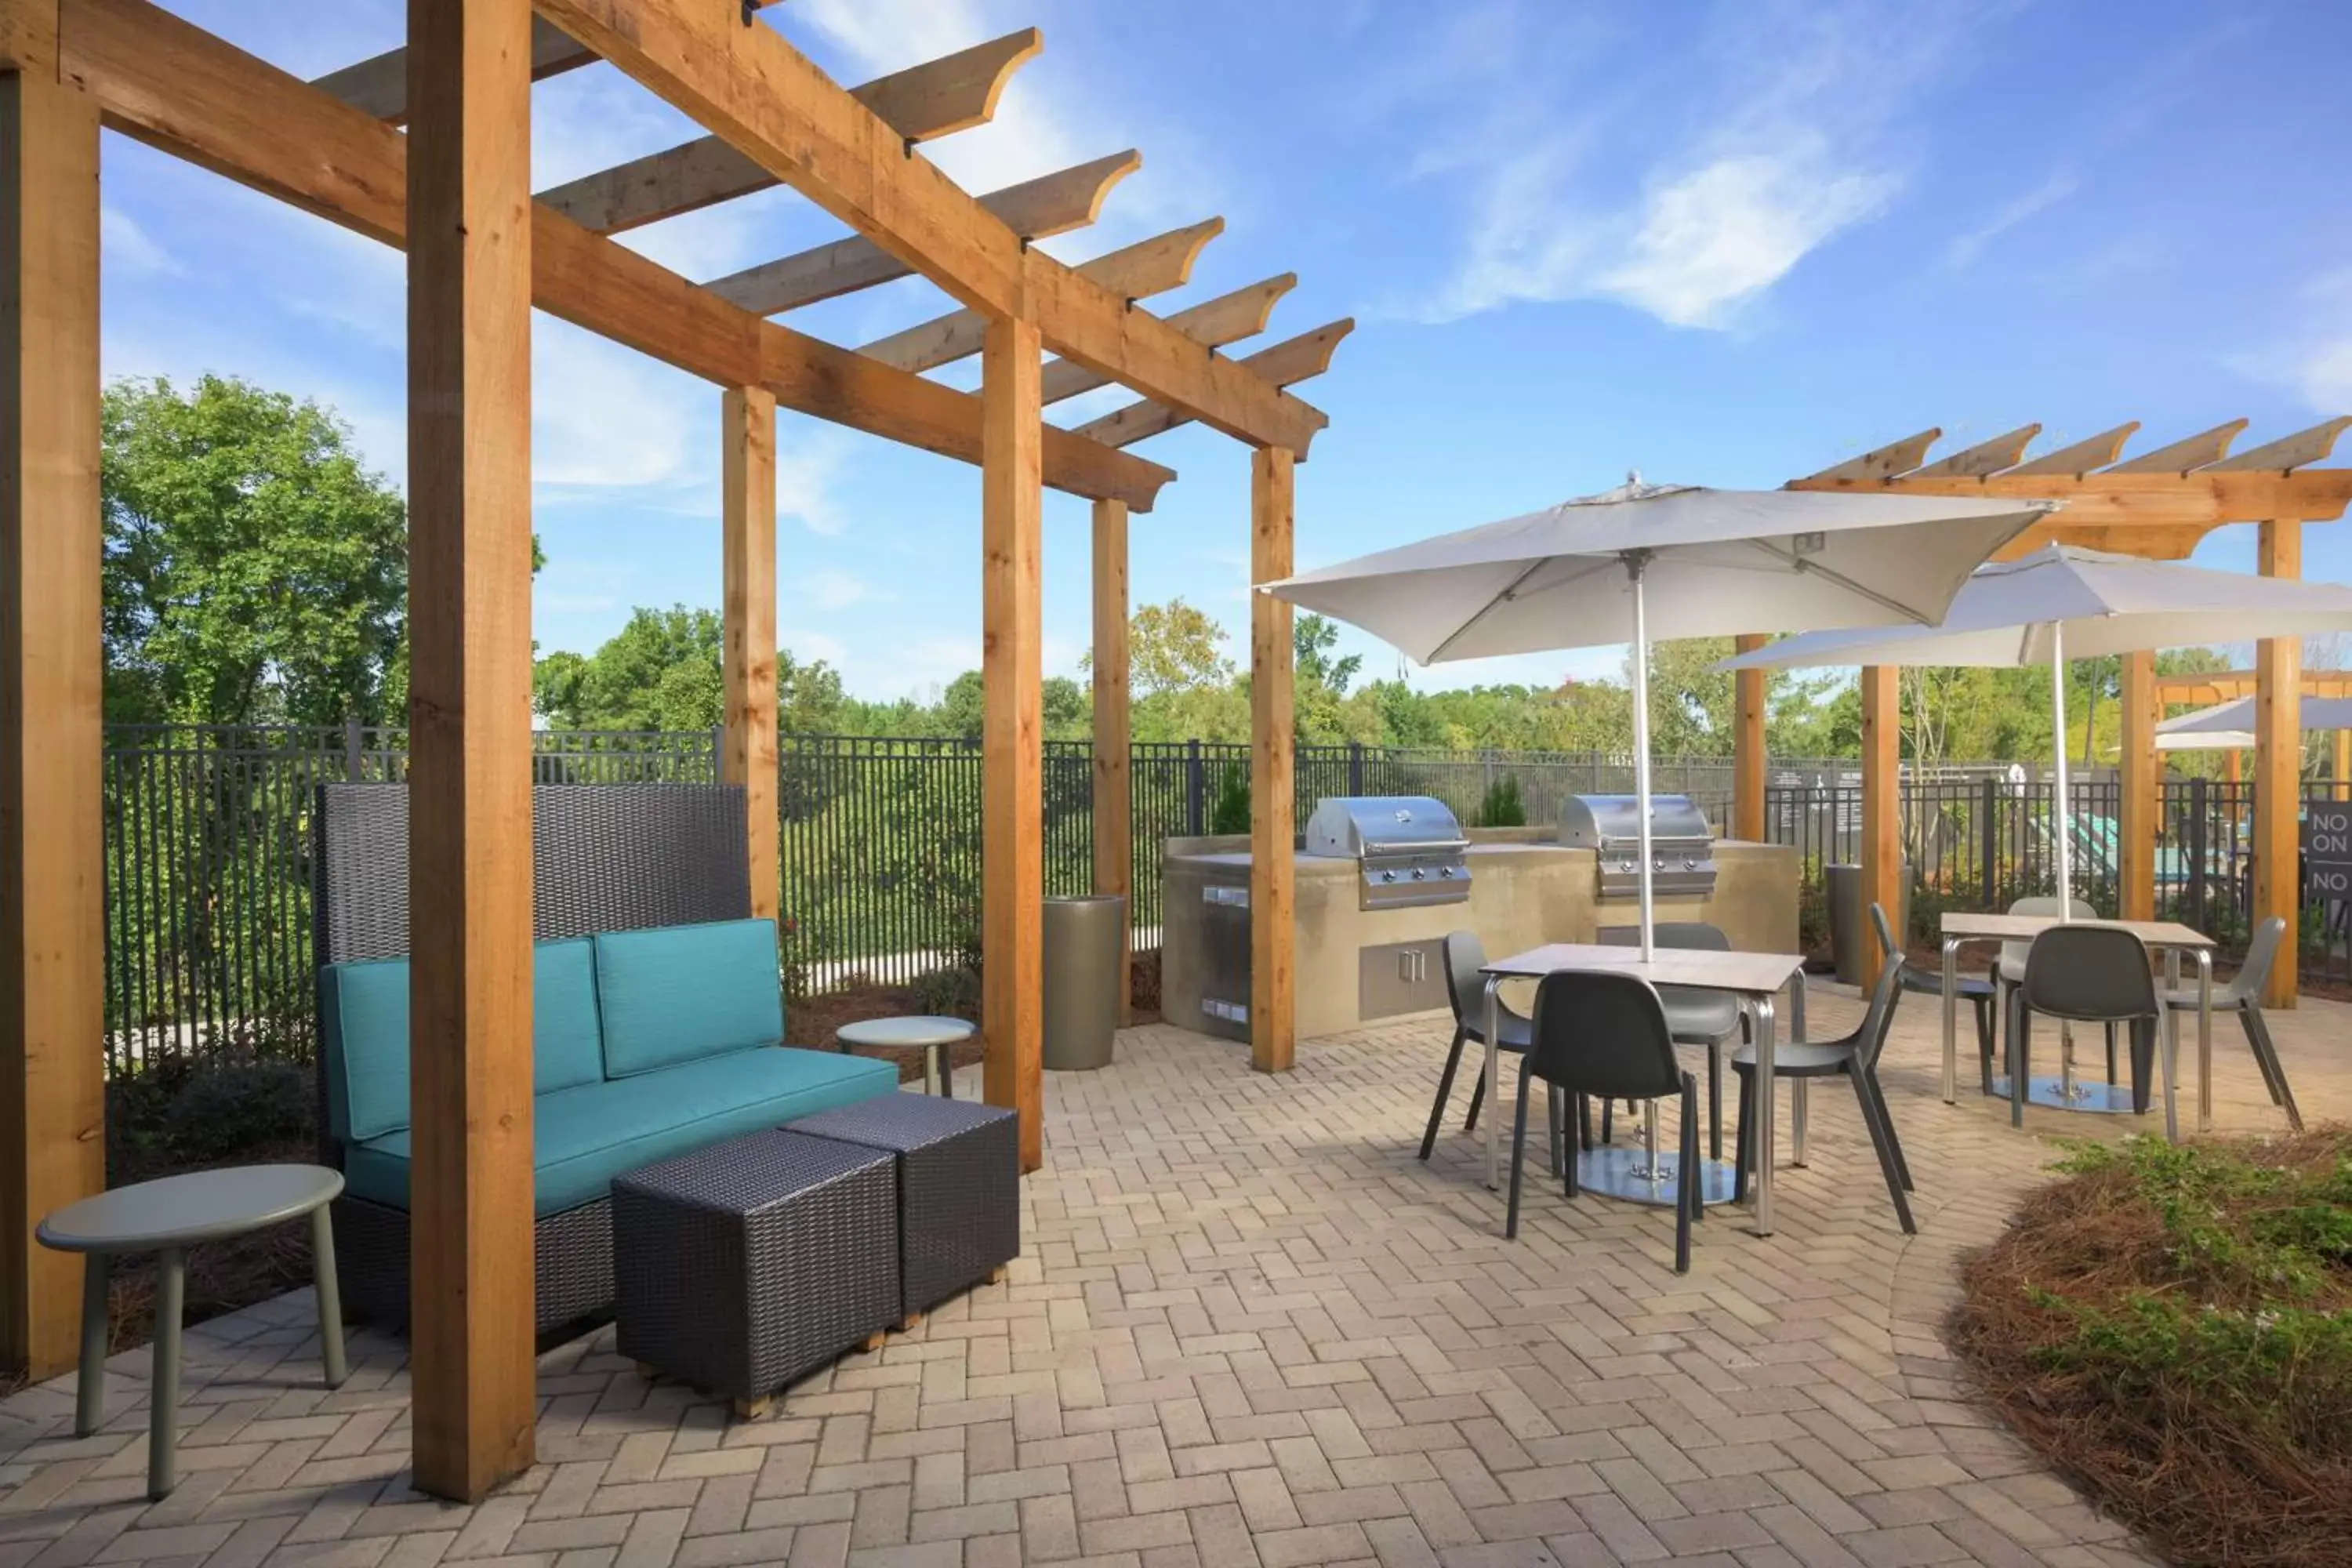 Patio in Home2 Suites By Hilton Atlanta Nw/Kennesaw, Ga